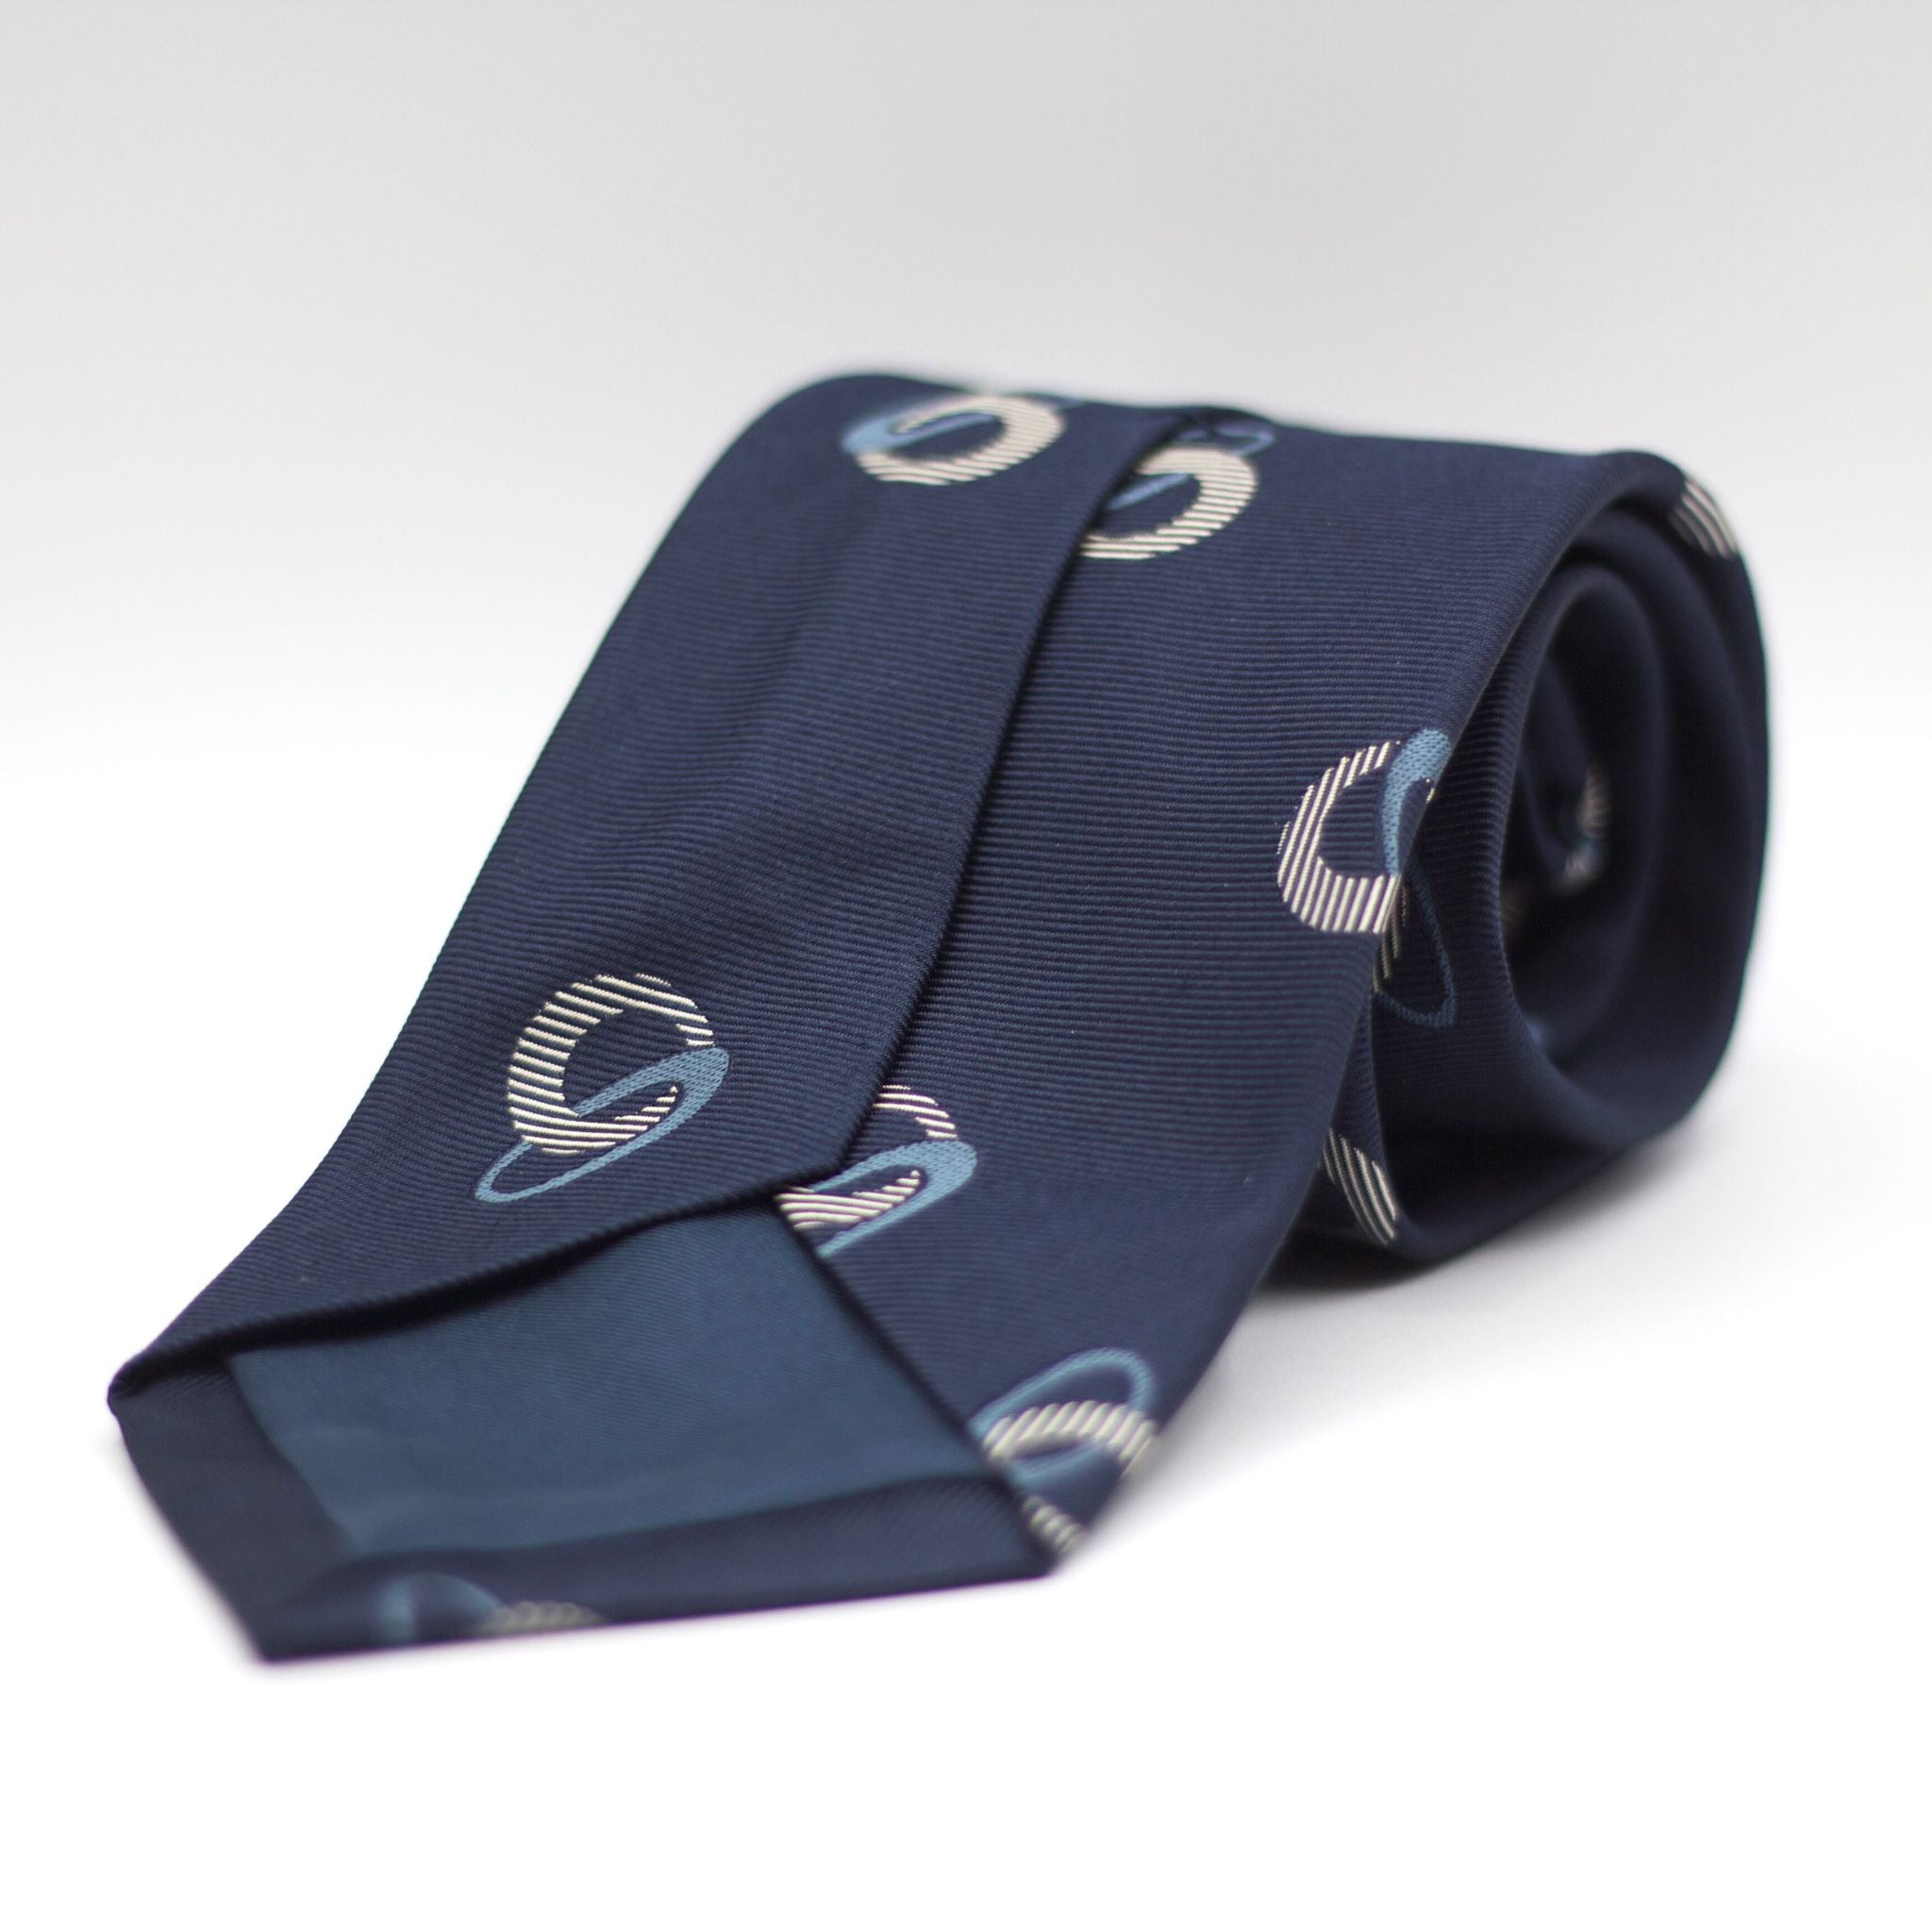 Holliday & Brown - Woven Jacquard Silk - Blue, Grey and Light Blue Tie